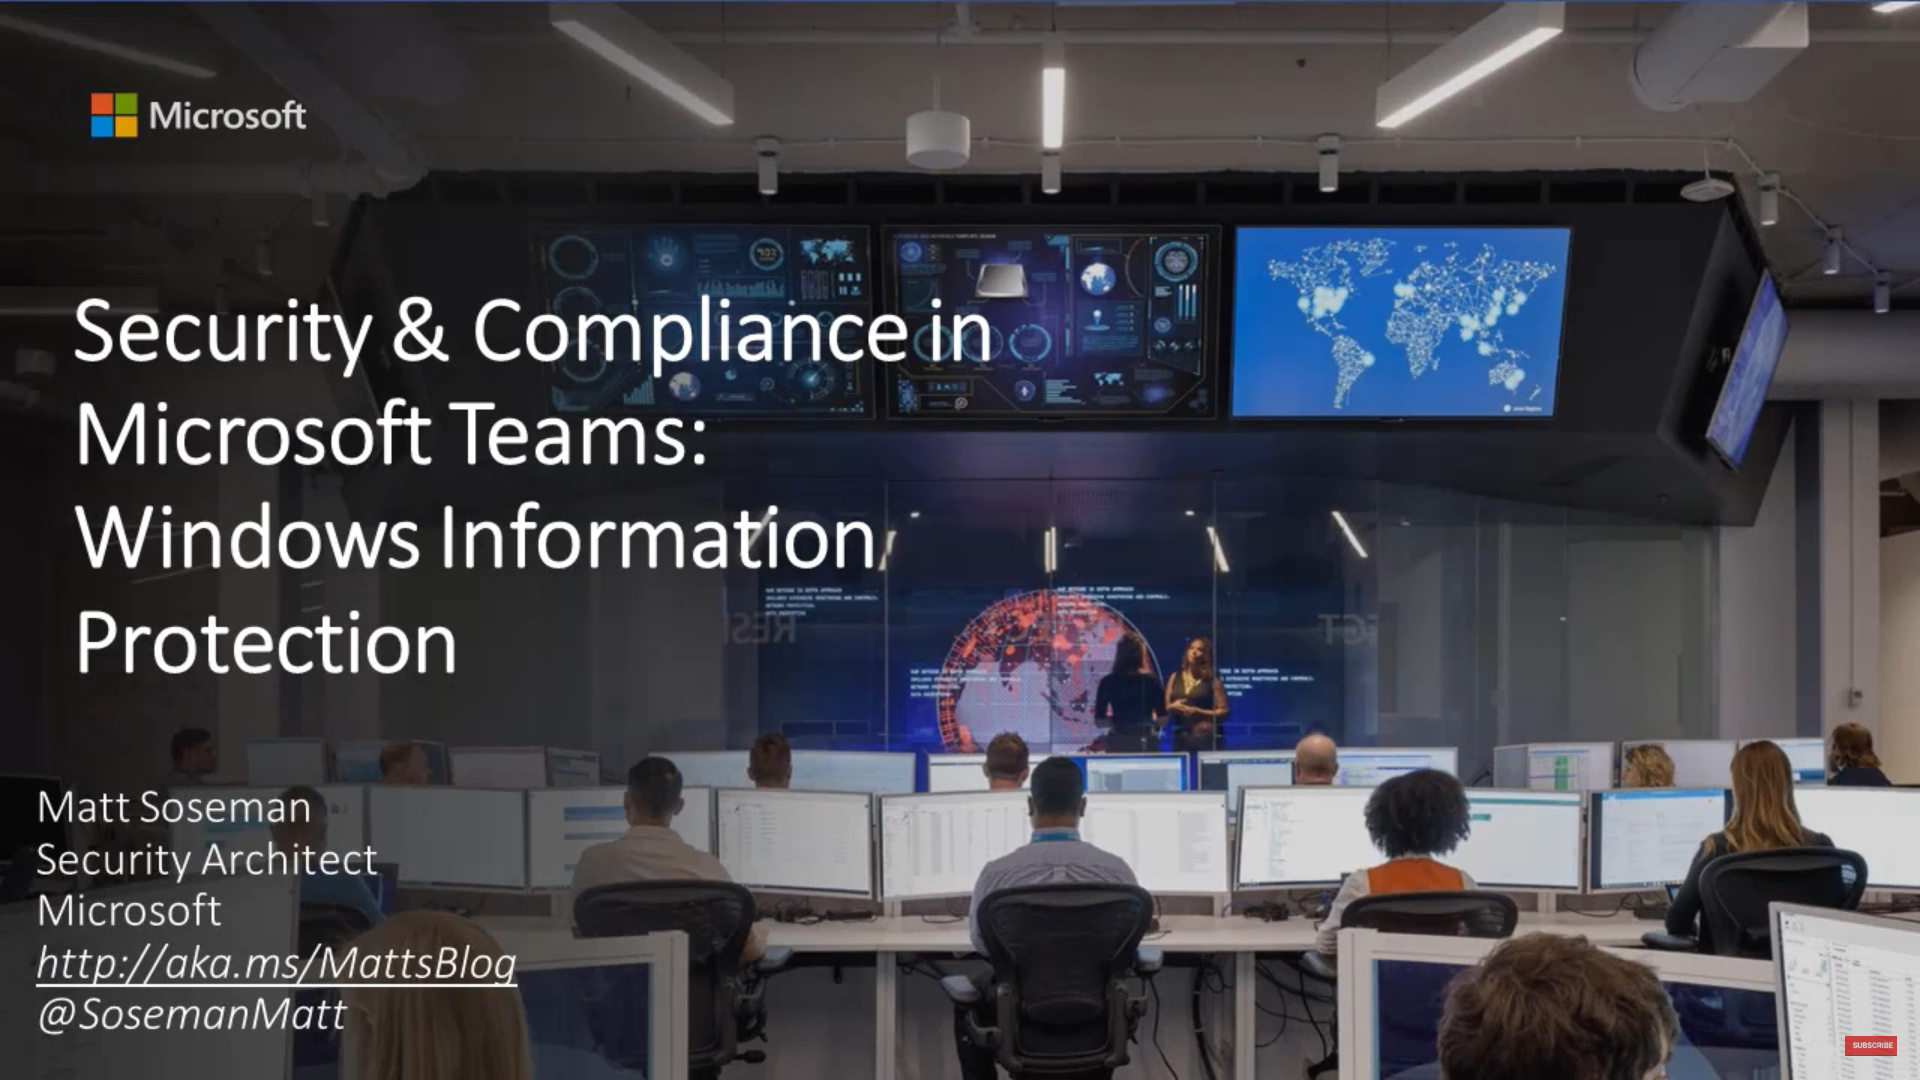 Security and Compliance in Microsoft Teams with Windows Information Protection